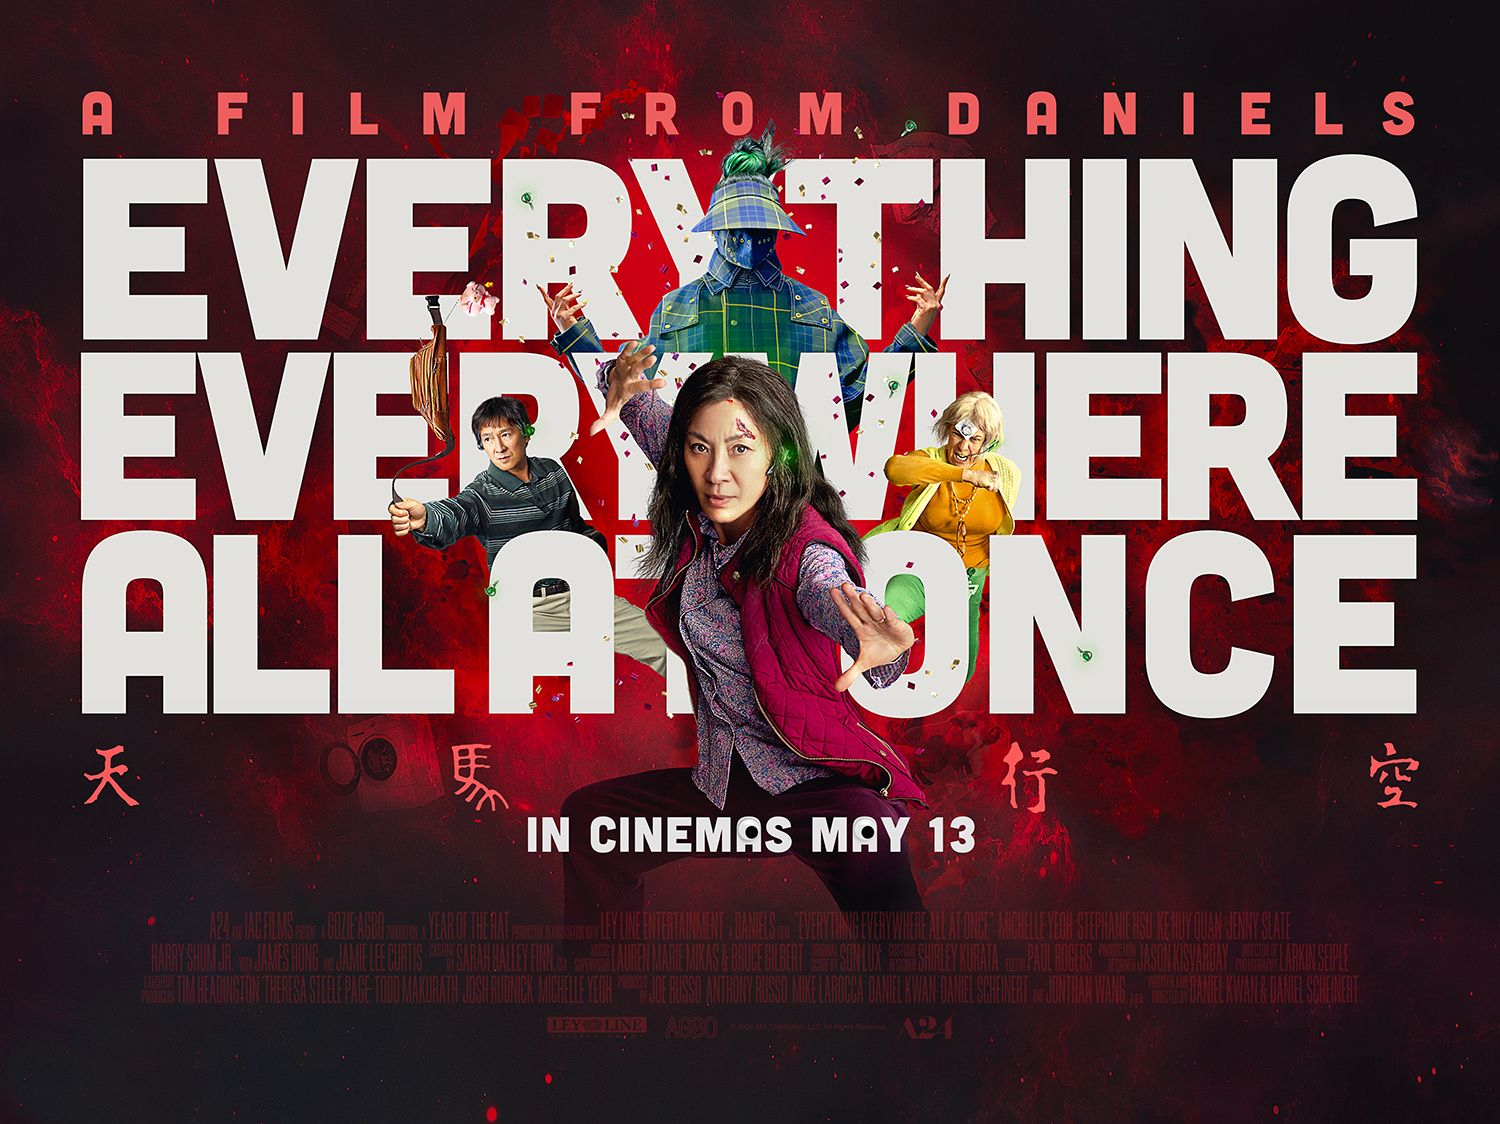 Movie banner for “Everything Everywhere All at Once”